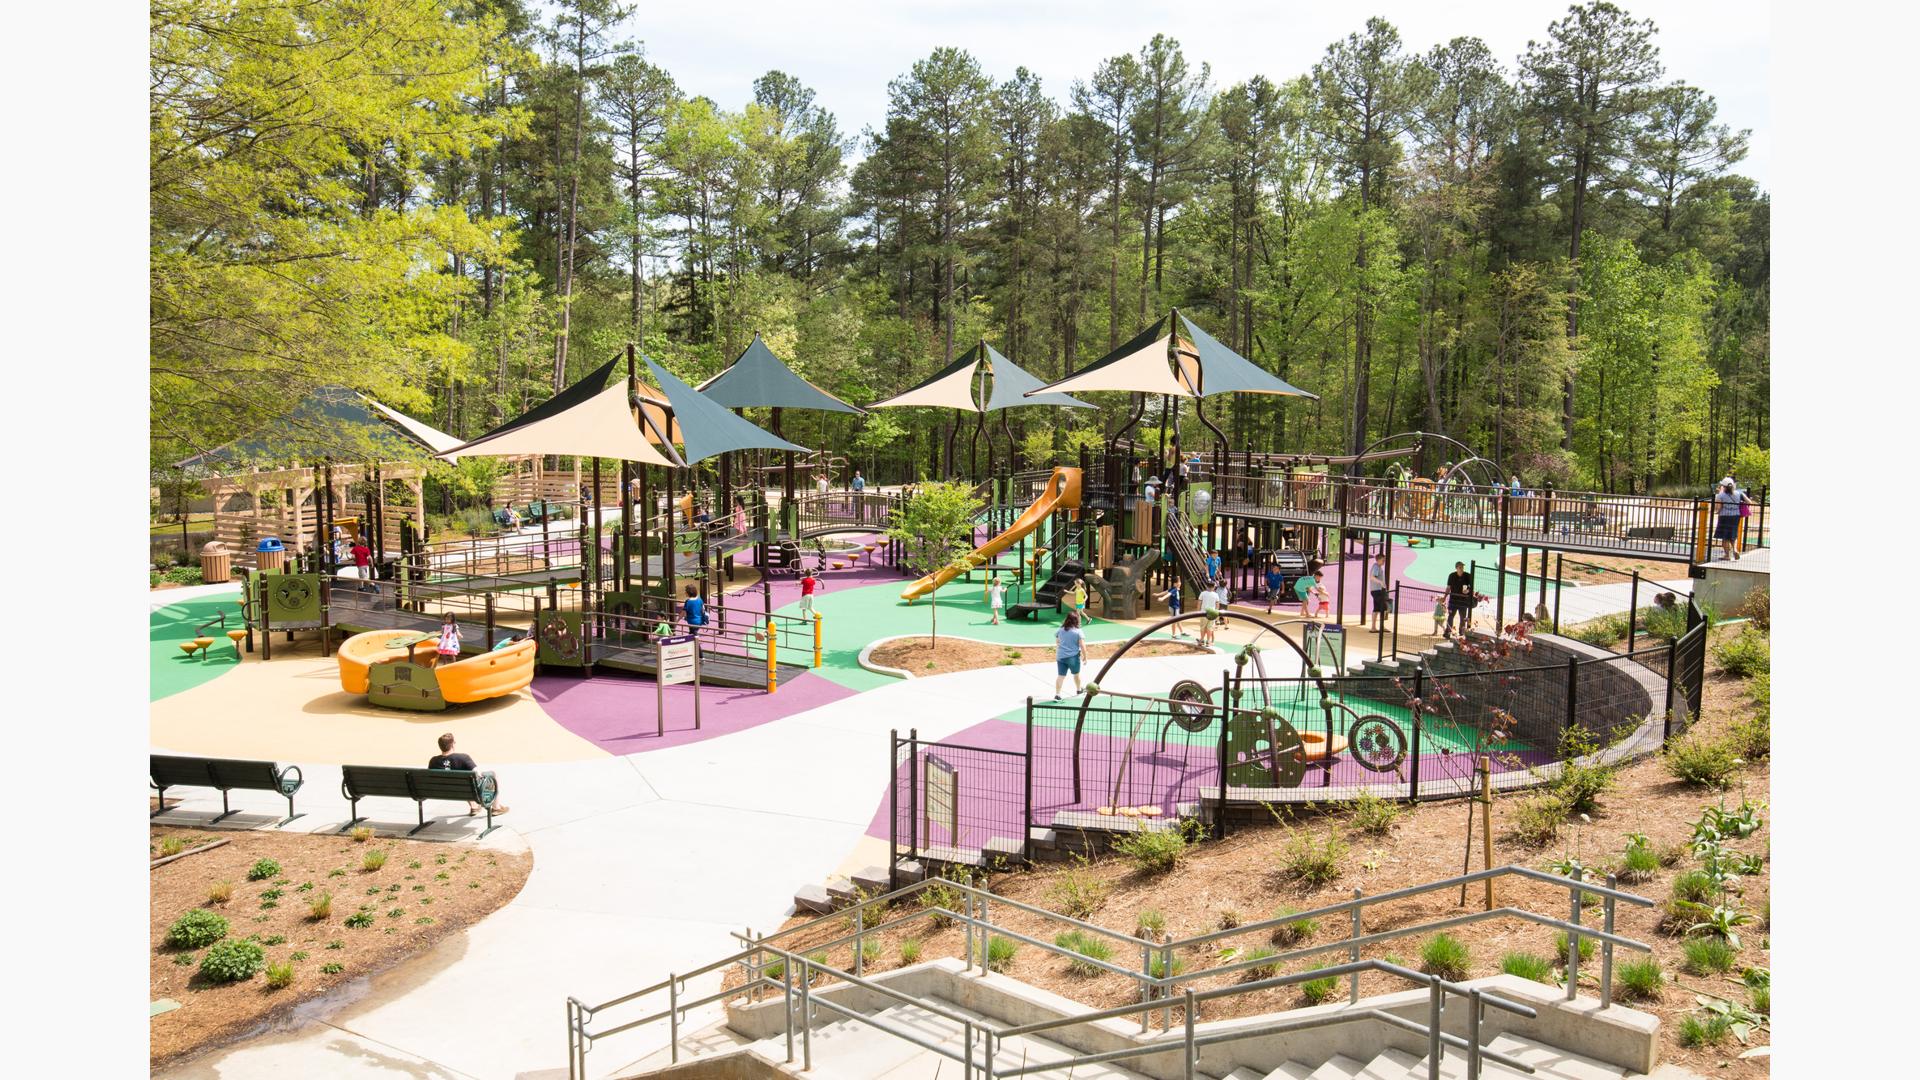 Filled with bridges and ramps, the playground also has tan and green multi-panel shade structures. This is a large playground with orange slides and surrounded by tall green trees.